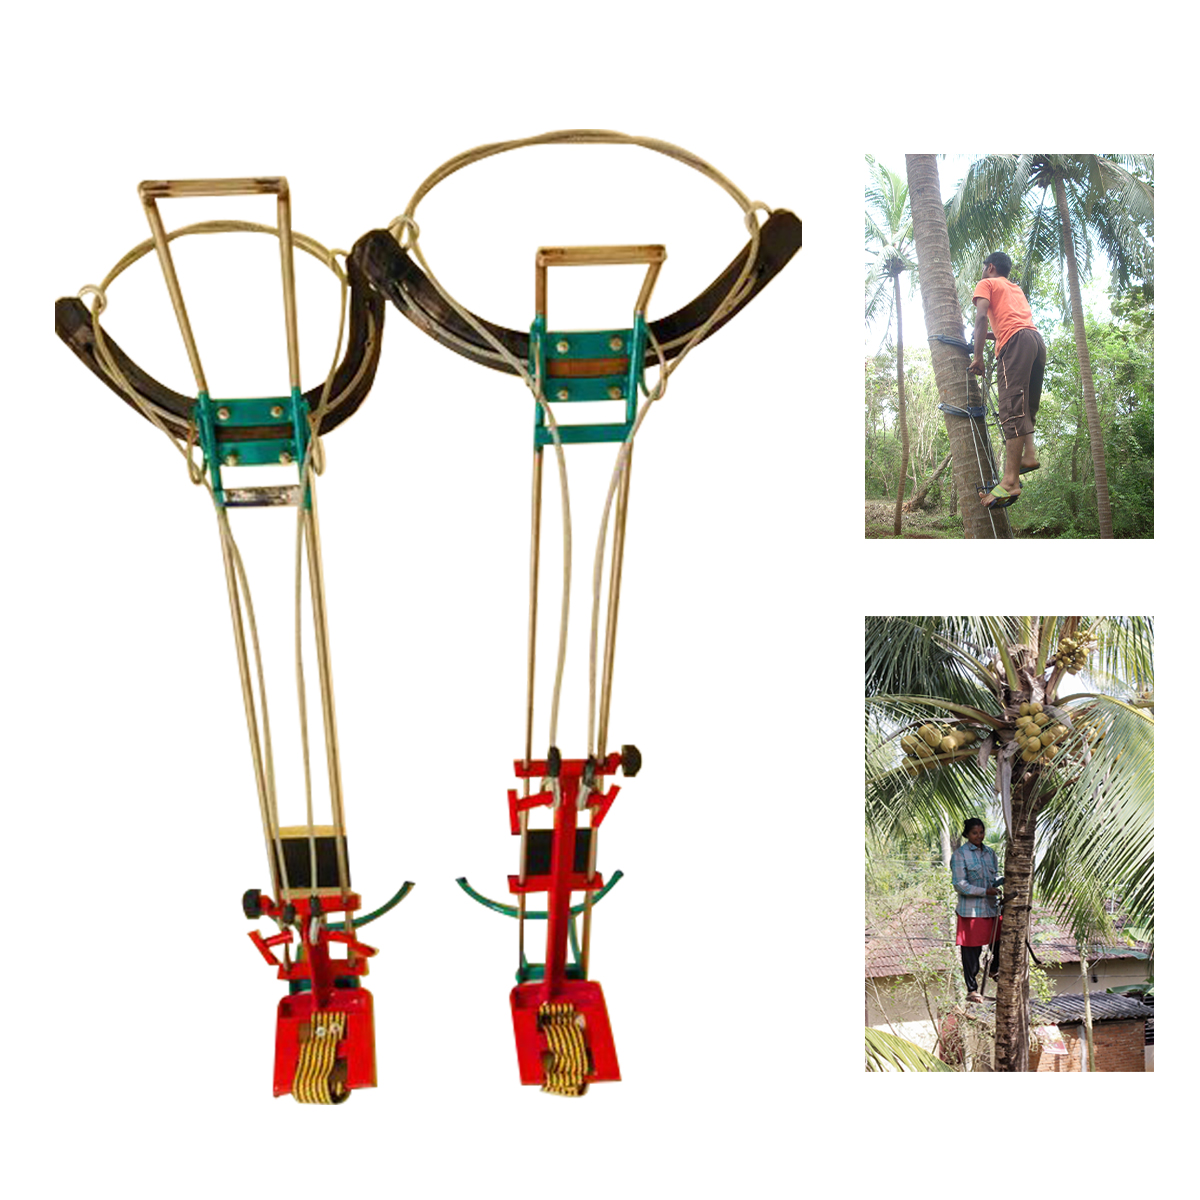 Coconut Tree Climber Machine with Safety Belt